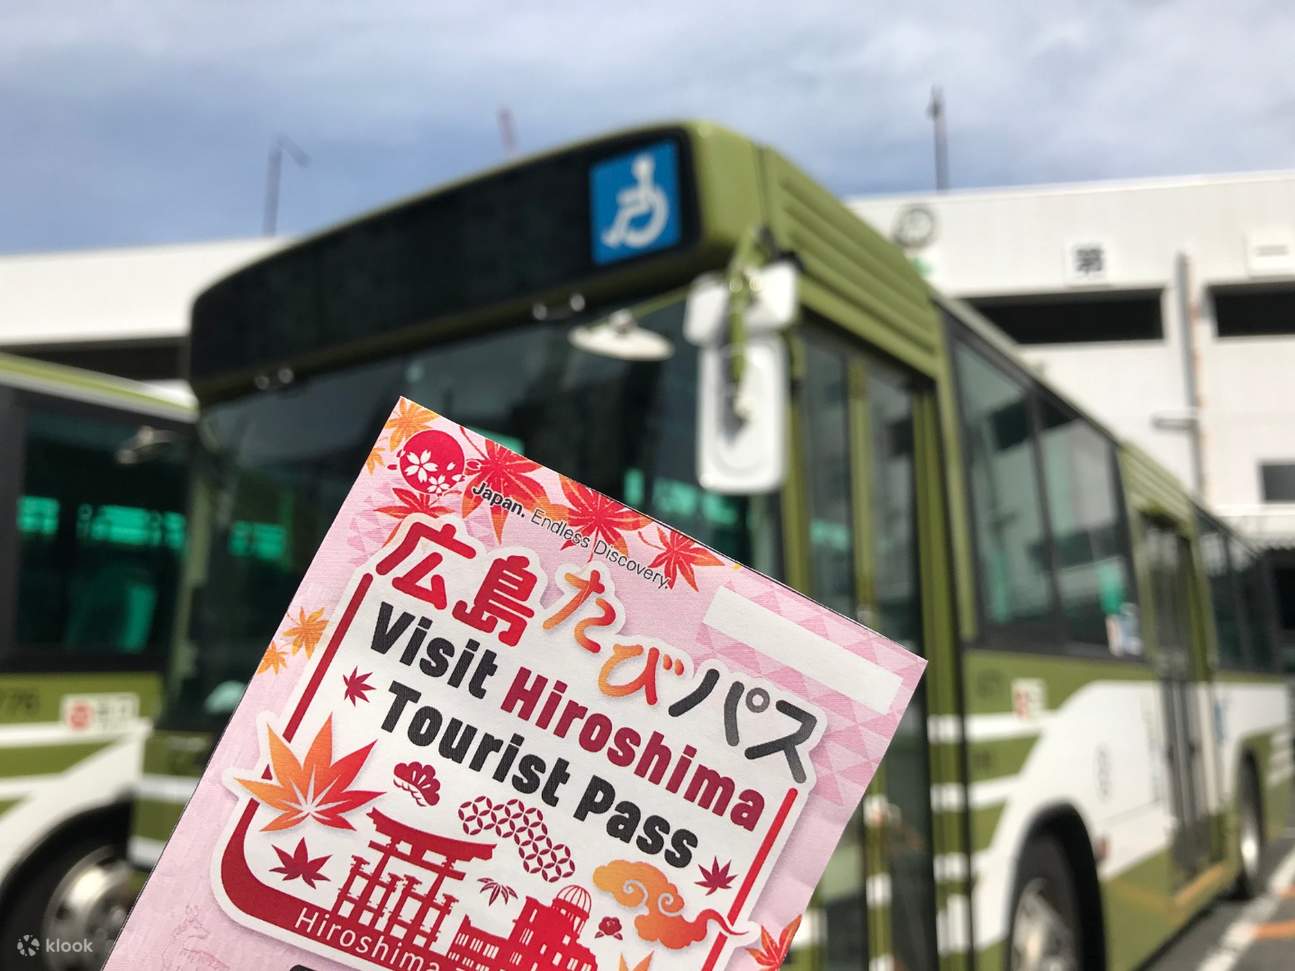 Hiroshima Tourist Pass being held up; there's a view of a bus